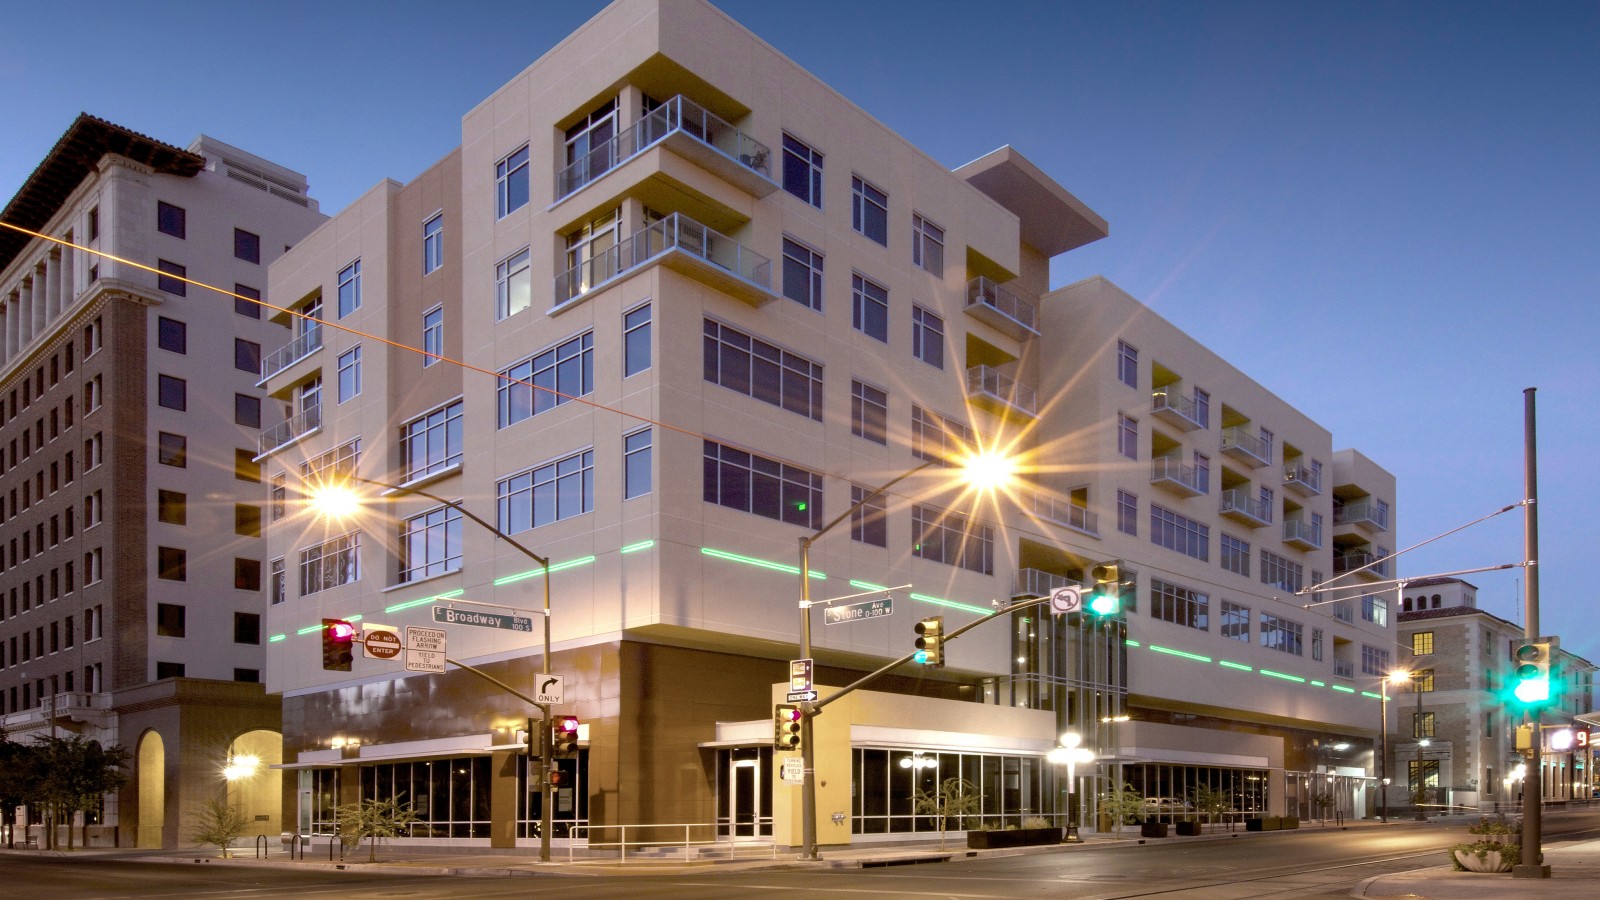 Main | One East Broadway | Apartments in Tucson, AZ